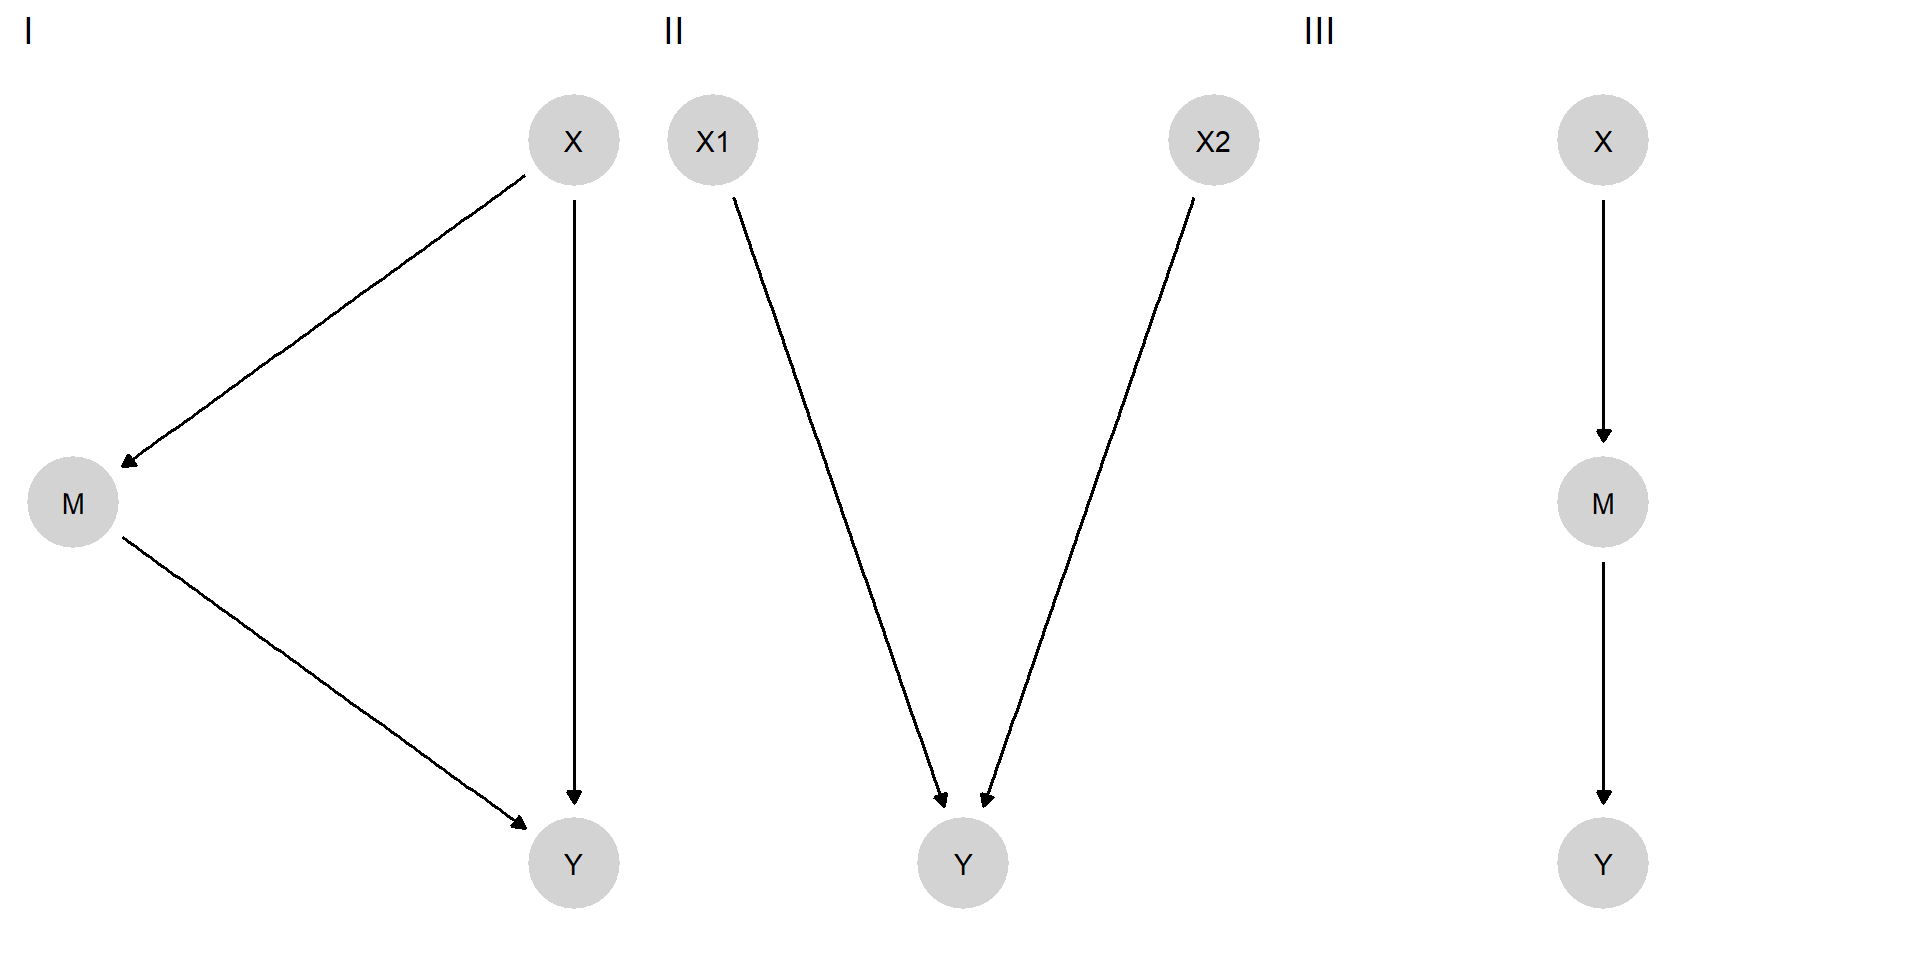 DAGs from three structural causal models.